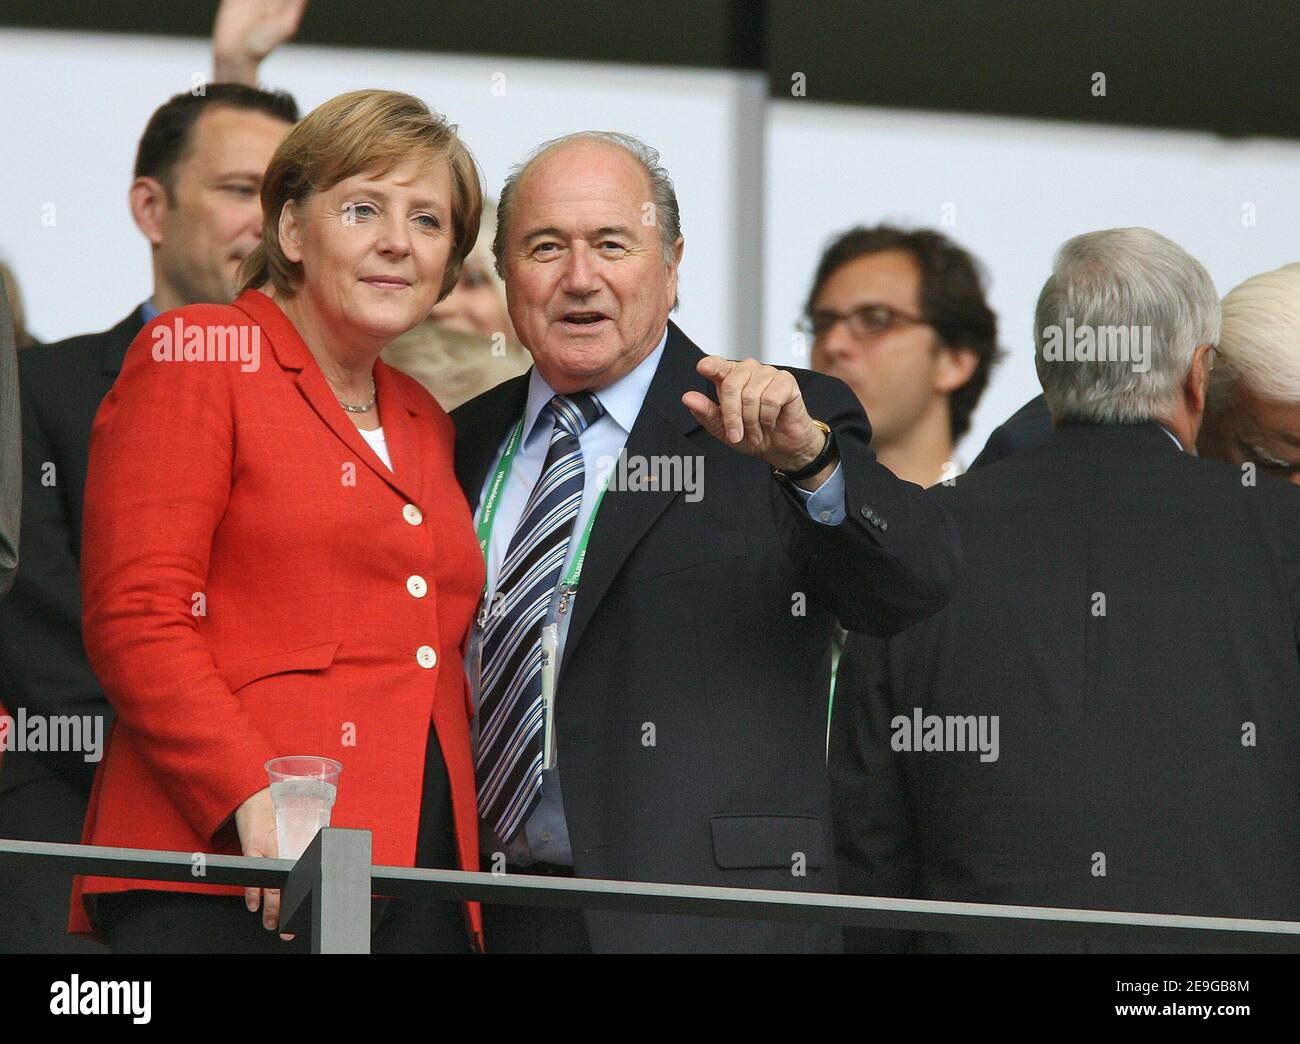 German Chancellor Angela Merkel and FIFA President Sepp Blatter during the FIFA World Cup 2006, quarter final, Germany vs Argentina, in Berlin, Germany, on June 30, 2006. The game ended in draw 1-1 and Germany won (4-2) in a penalty-kick shootout. Photo by Gouhier-Hahn-Orban/Cameleon/ABACAPRESS.COM Stock Photo